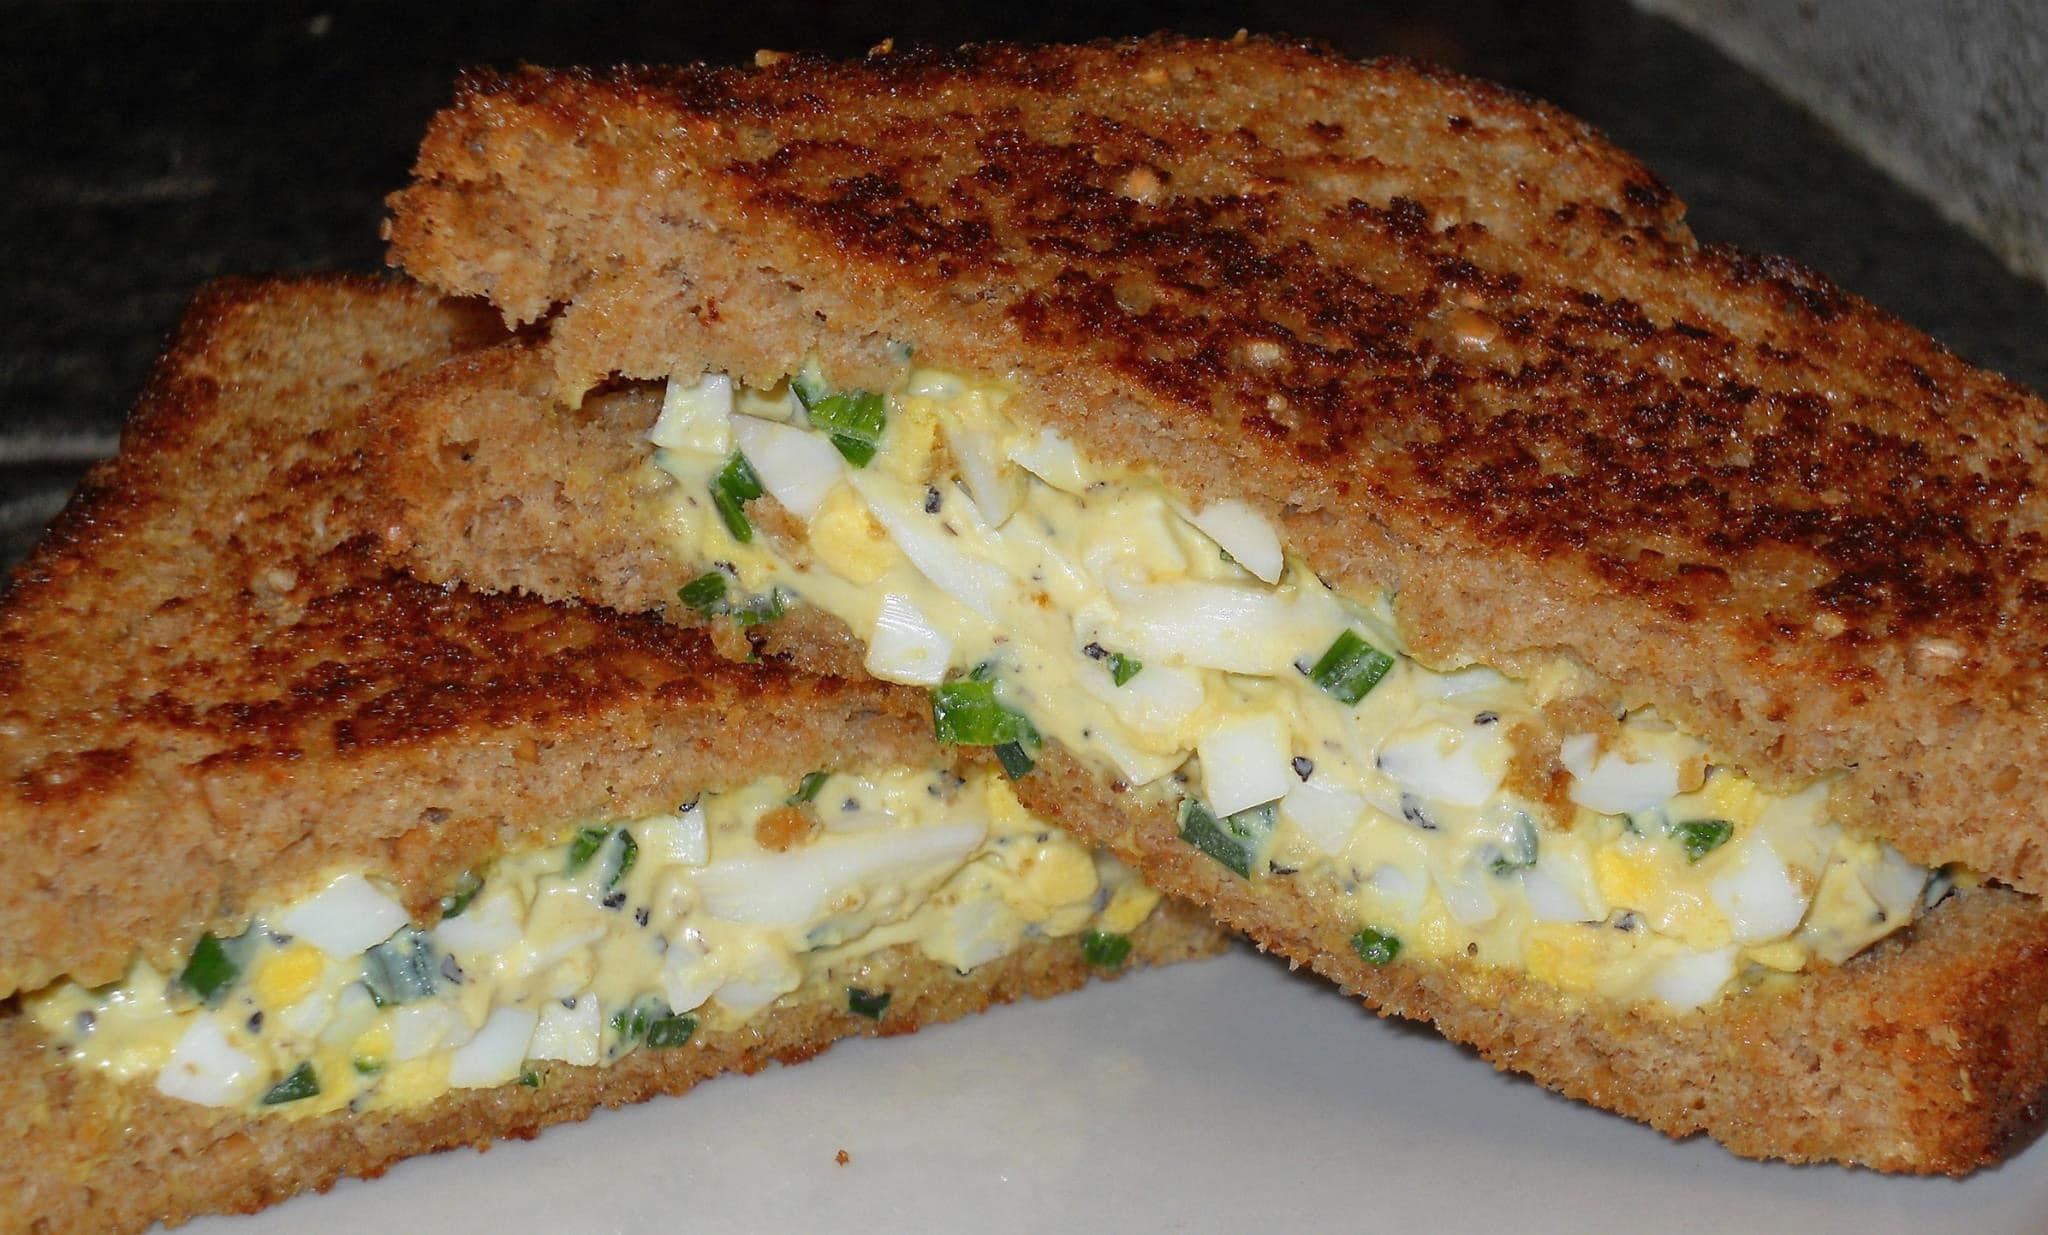 An egg salad sandwich sits on a white plate